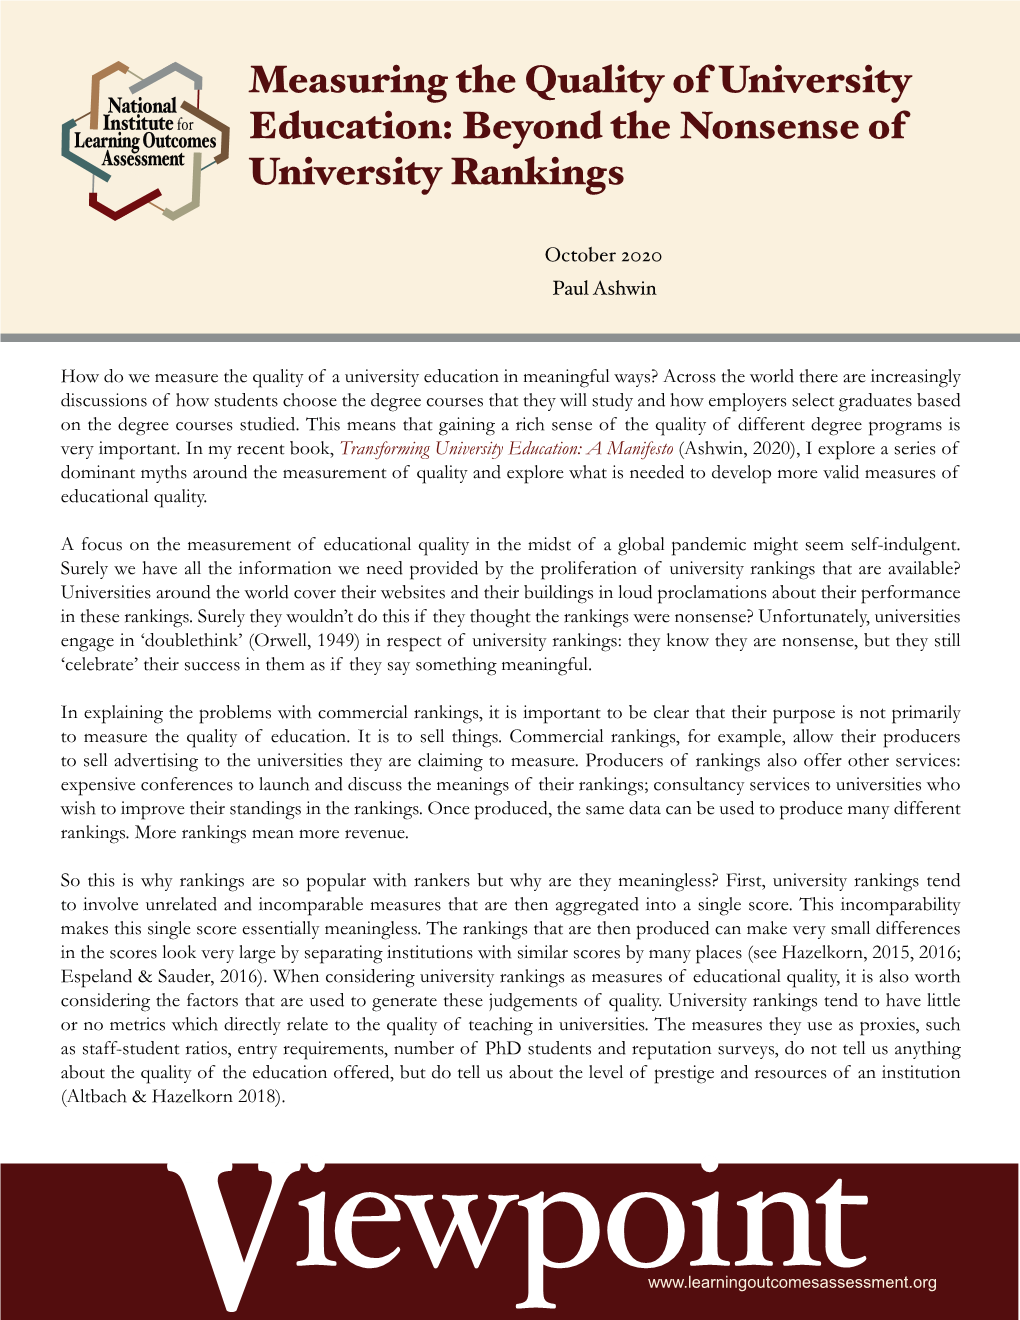 Measuring the Quality of University Education: Beyond the Nonsense of University Rankings